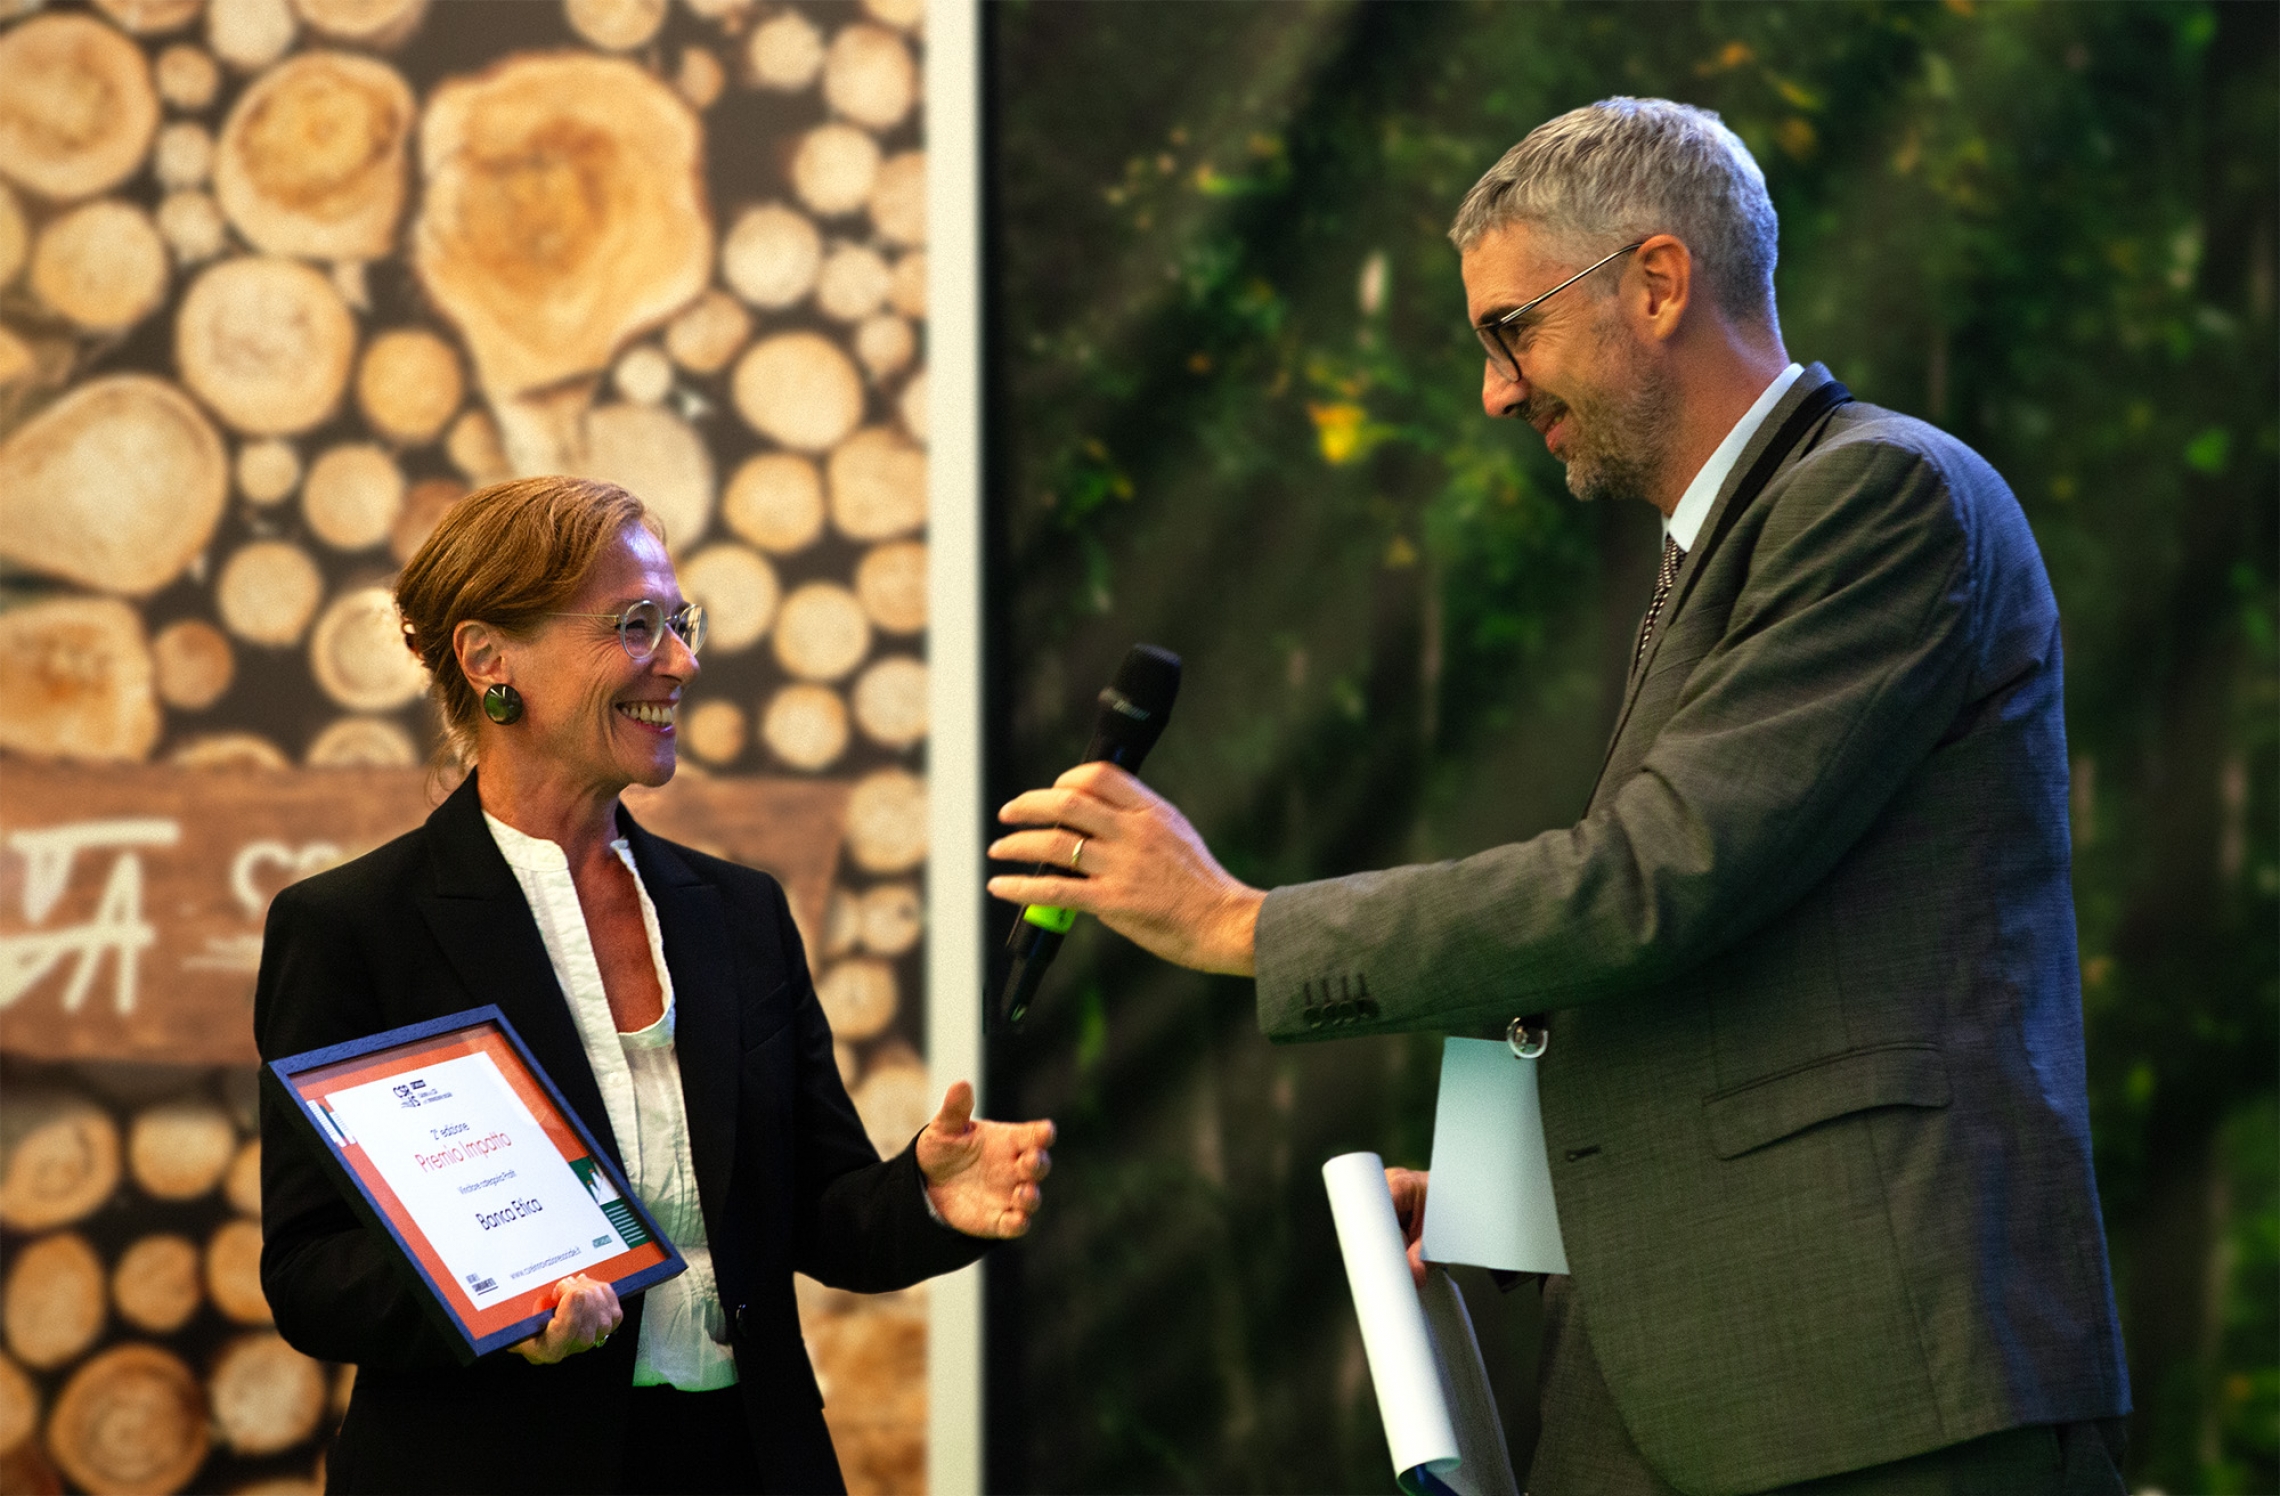 Banca Etica receives the sustainability award at the CSR Exhibition in Milan